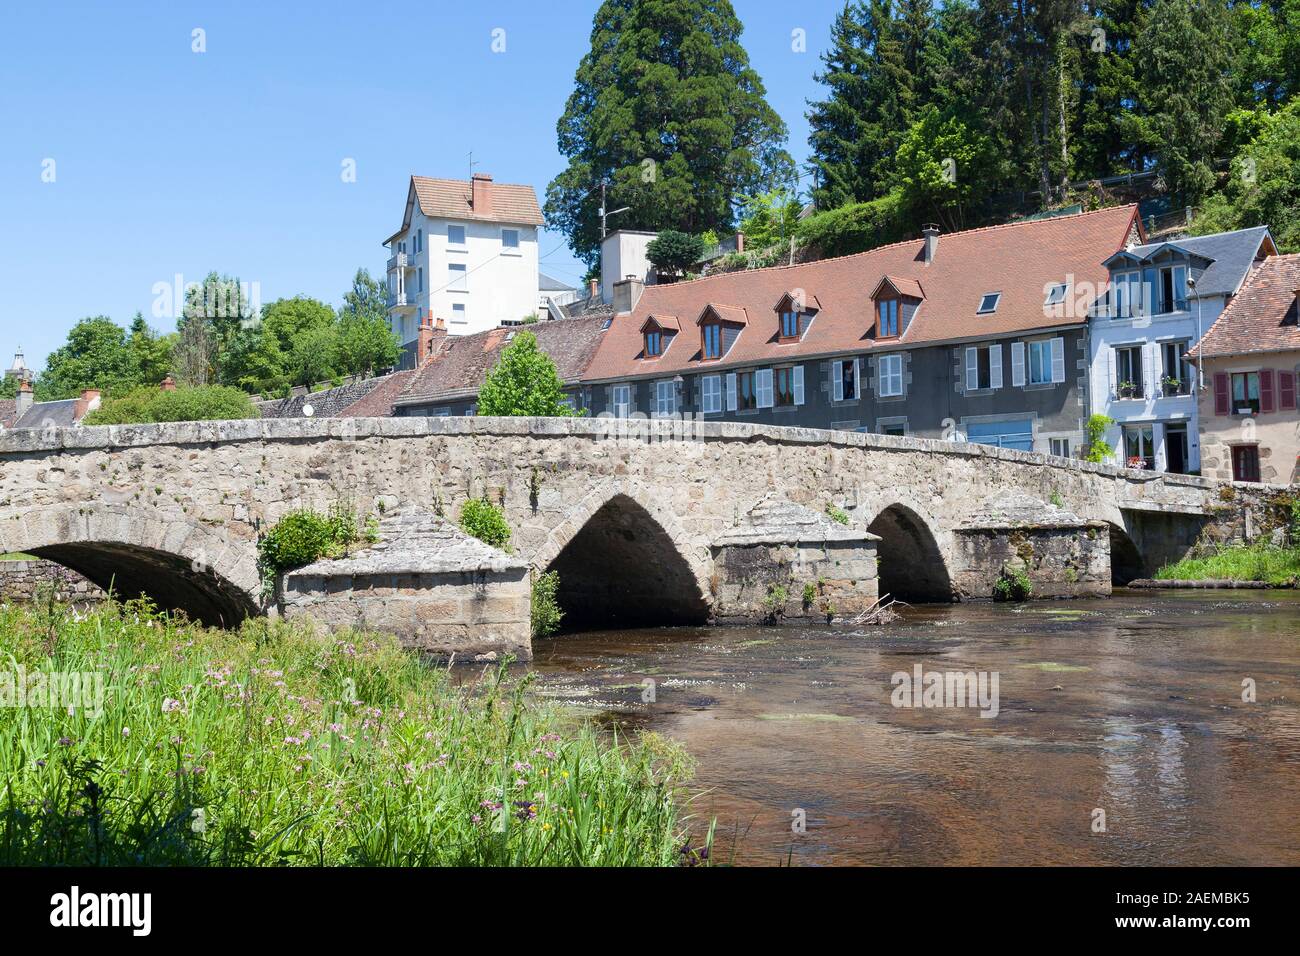 15thC Pont Roby crossing the River Creuse, Felletin, Creuse, Nouvelle-Aquitaine, France. Felletin is the centre of the 550 year old French tapestry in Stock Photo